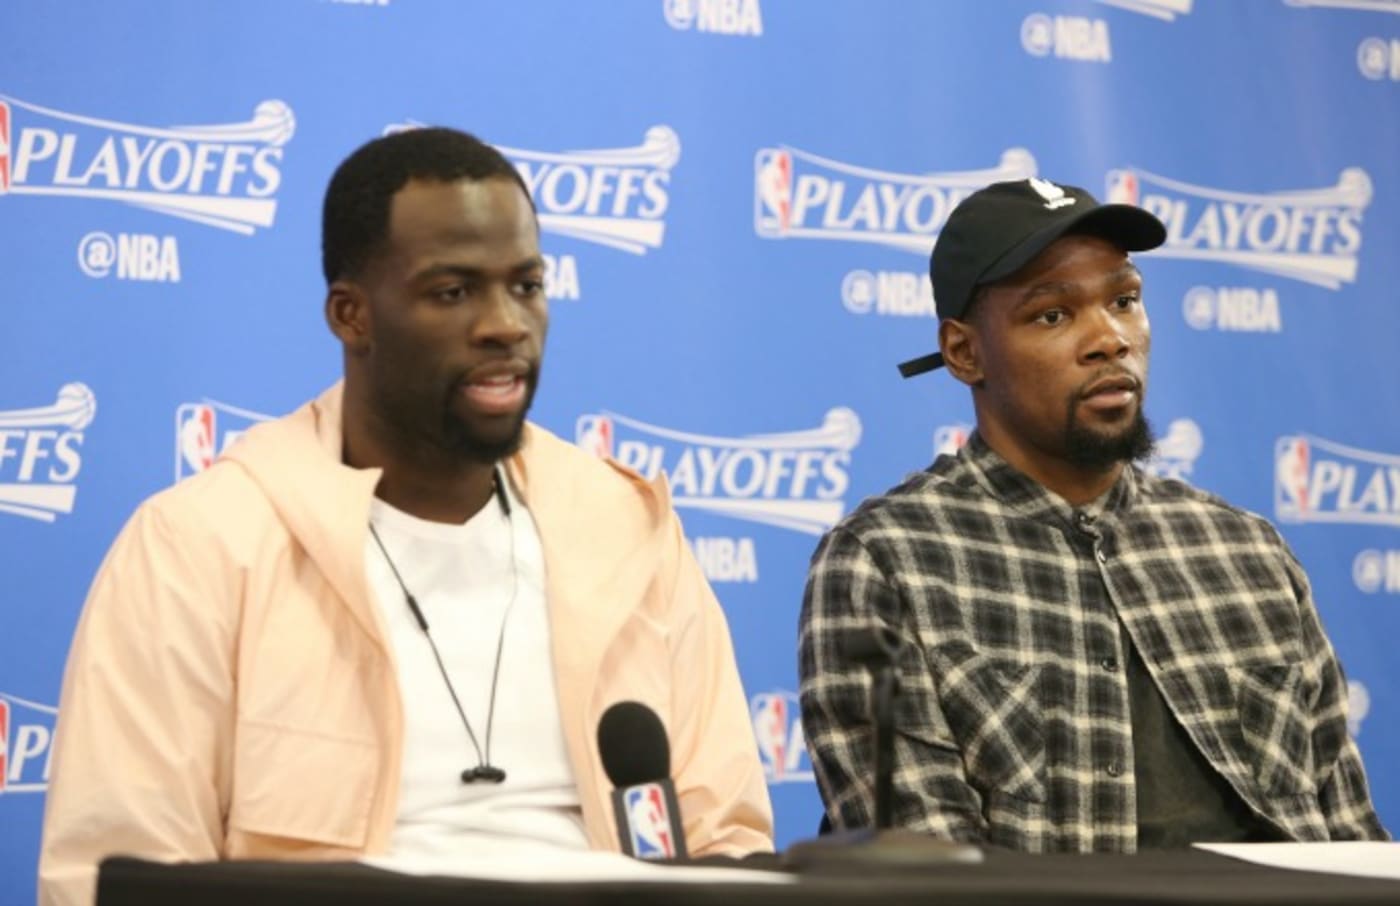 Draymond Green and Kevin Durant attend a press conference during the 2017 NBA Playoffs.